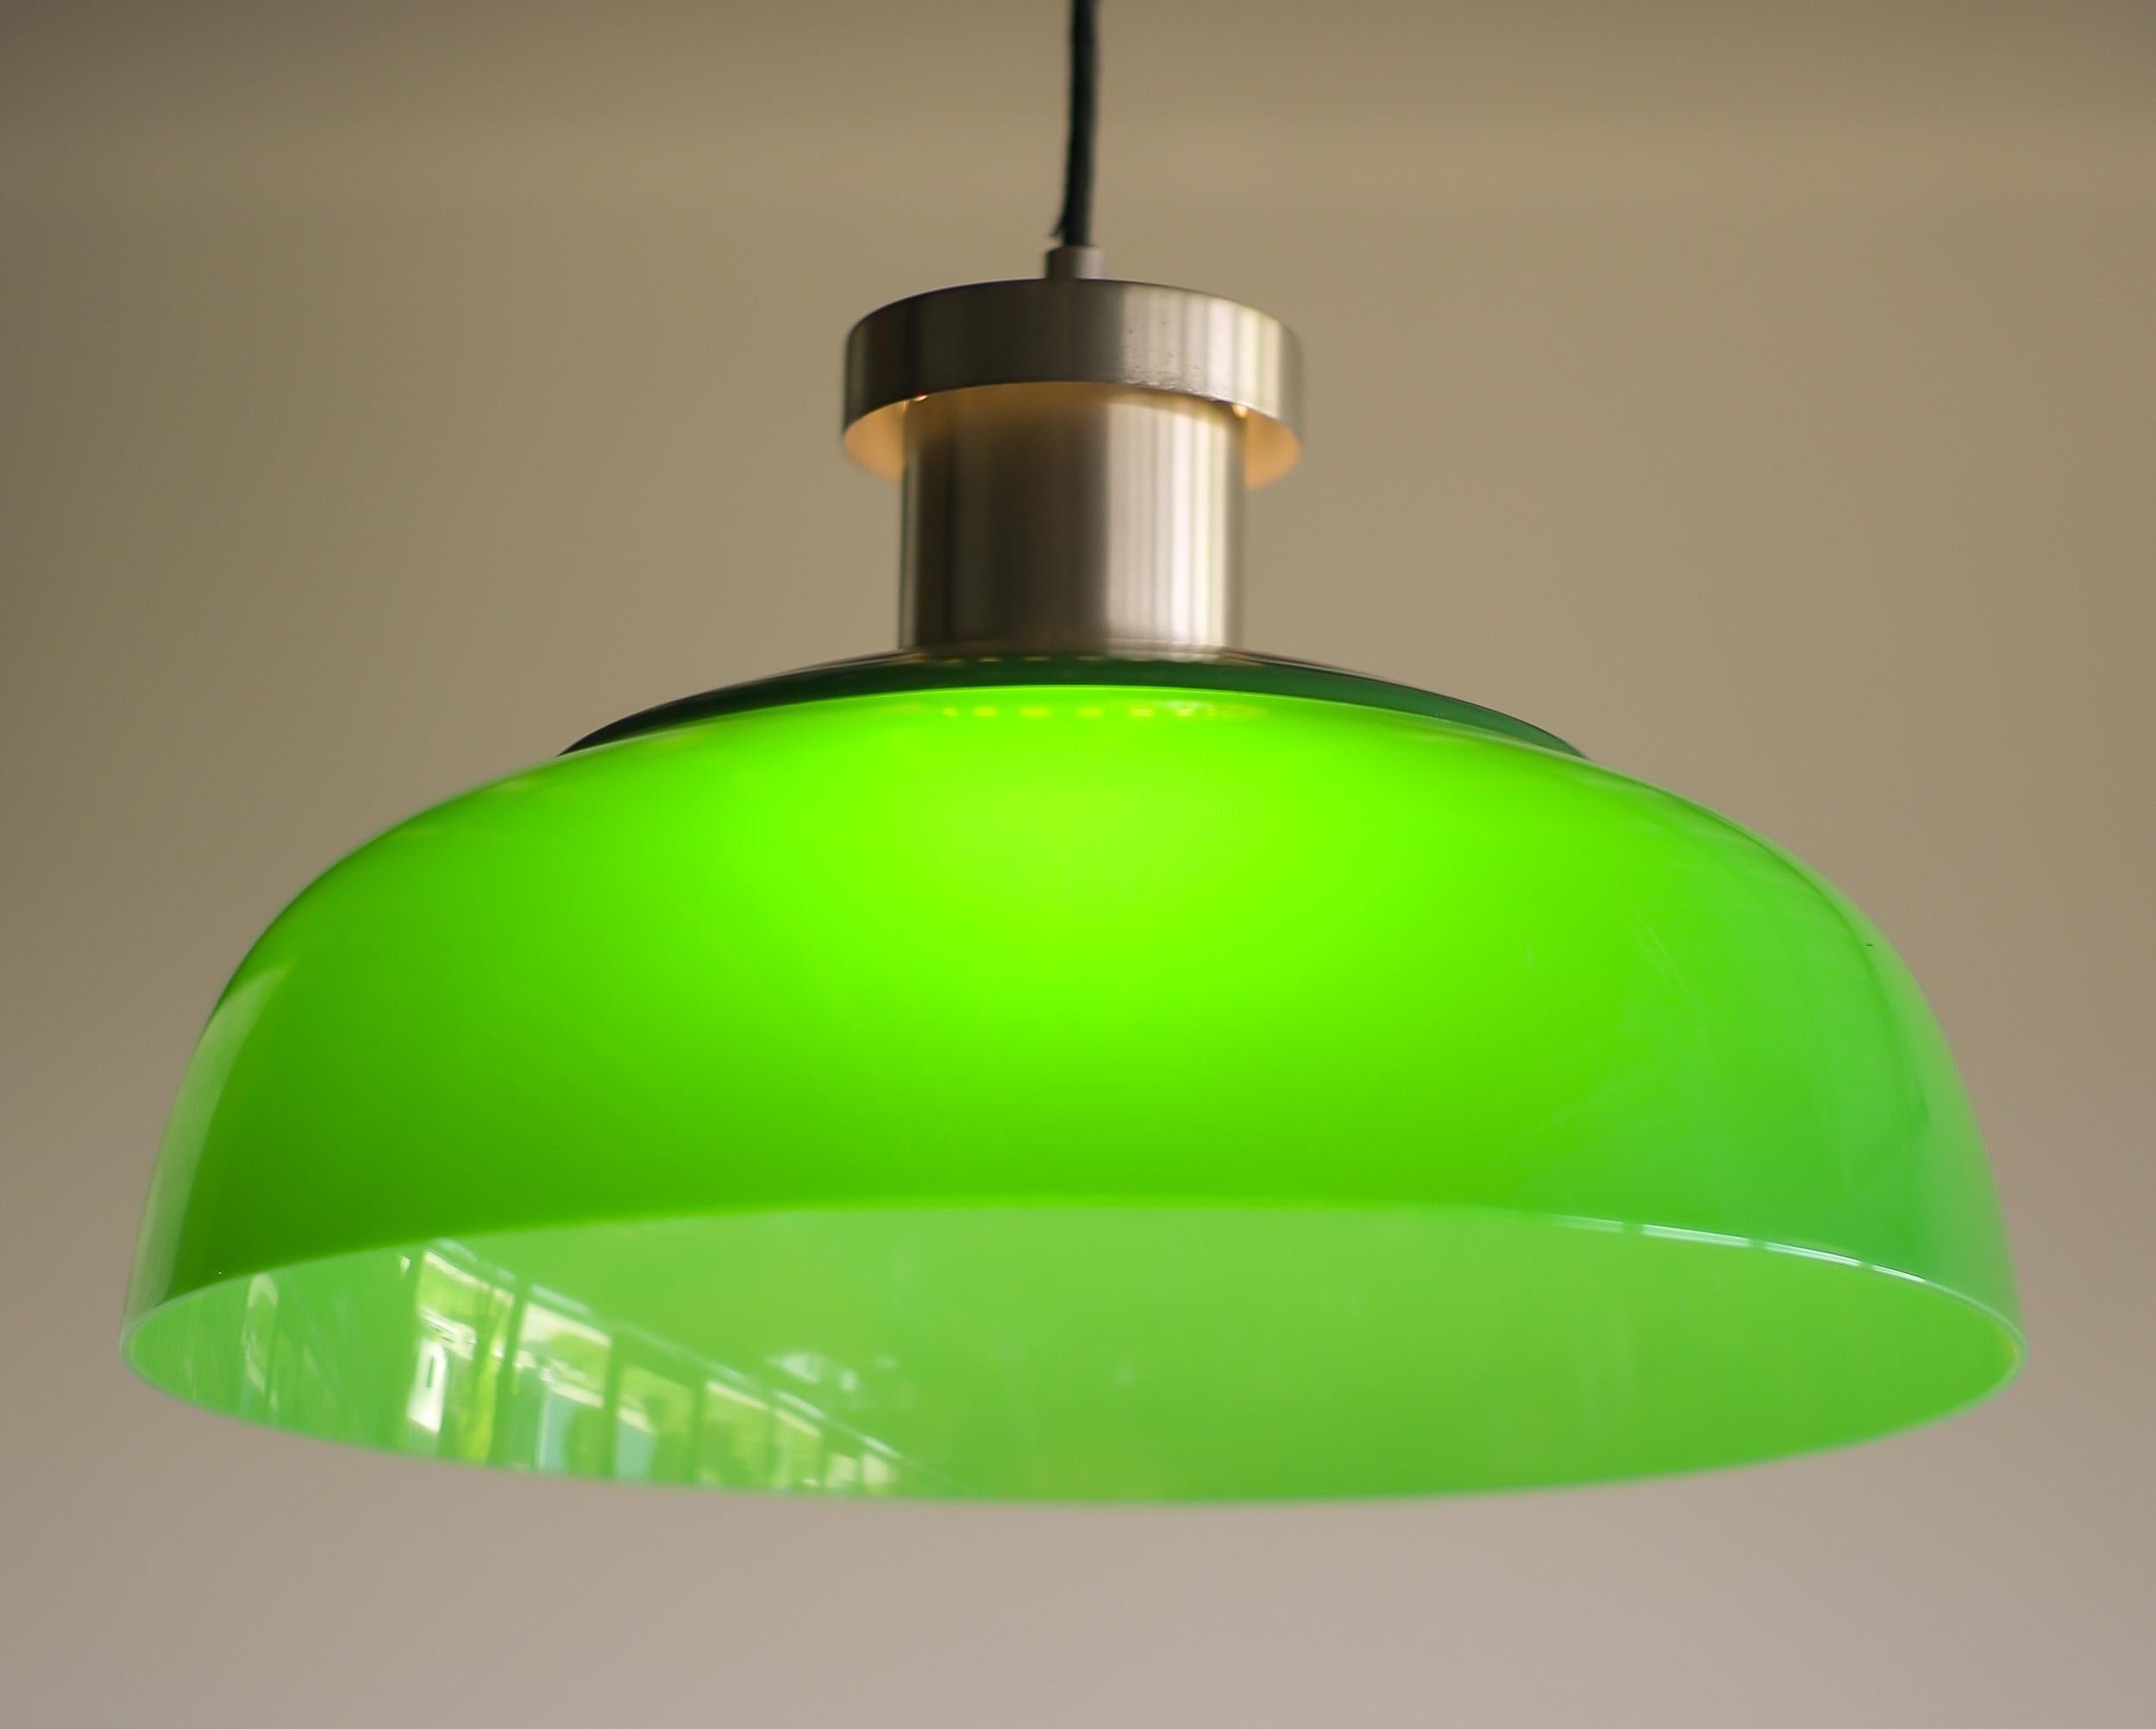 Very rare Mid-Century Modern Italian pendant. This was the first lighting design by Achille Castiglioni, manufactured by Kartell. Made of nickel-plated steel with an acrylic shade it looks very contemporary, but it is vintage Mid-Century